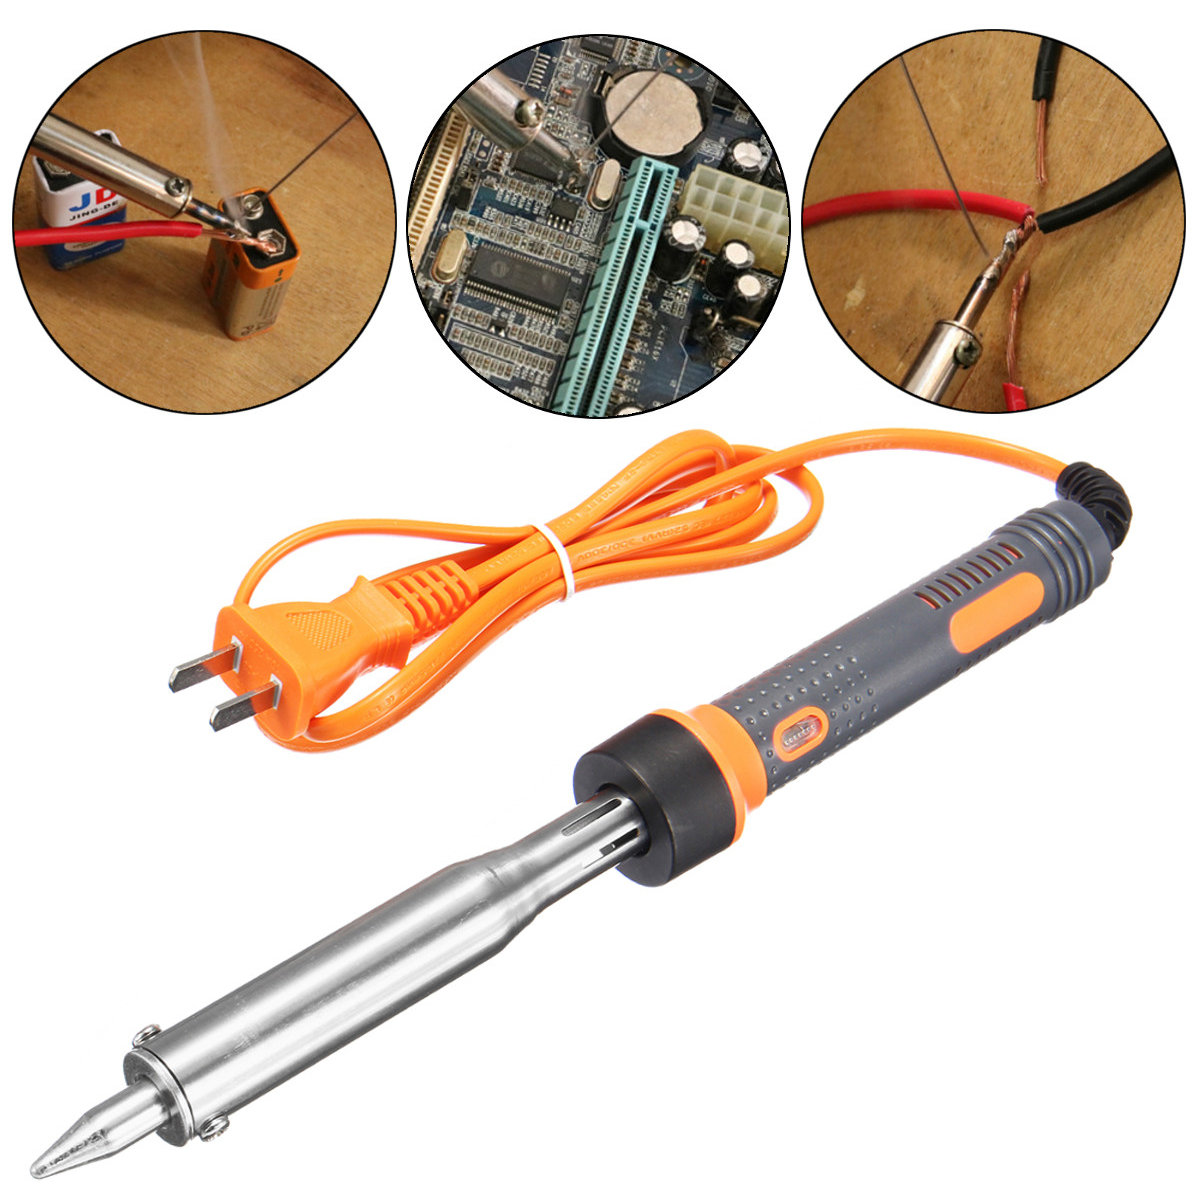 

220V 100W/150W Electric Heating Pencil Welding Soldering Solder Iron Tool